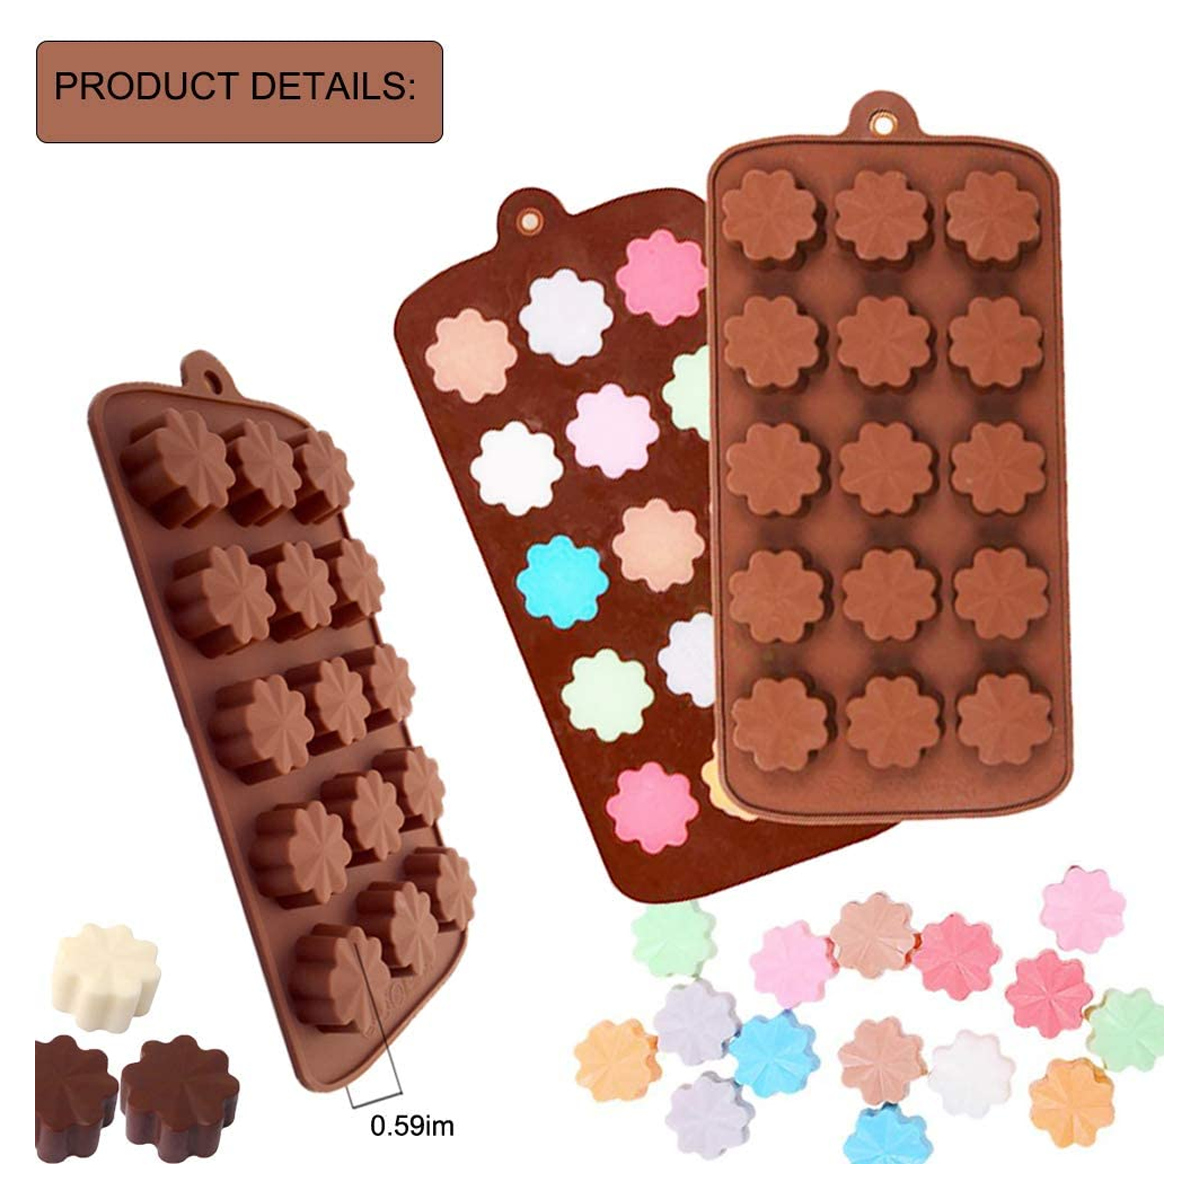 6 Pack Silicone Candy Molds，in Shape of Rose, Tulip, Sunflower, Lotus Etc, Food Grade Silicon Mold